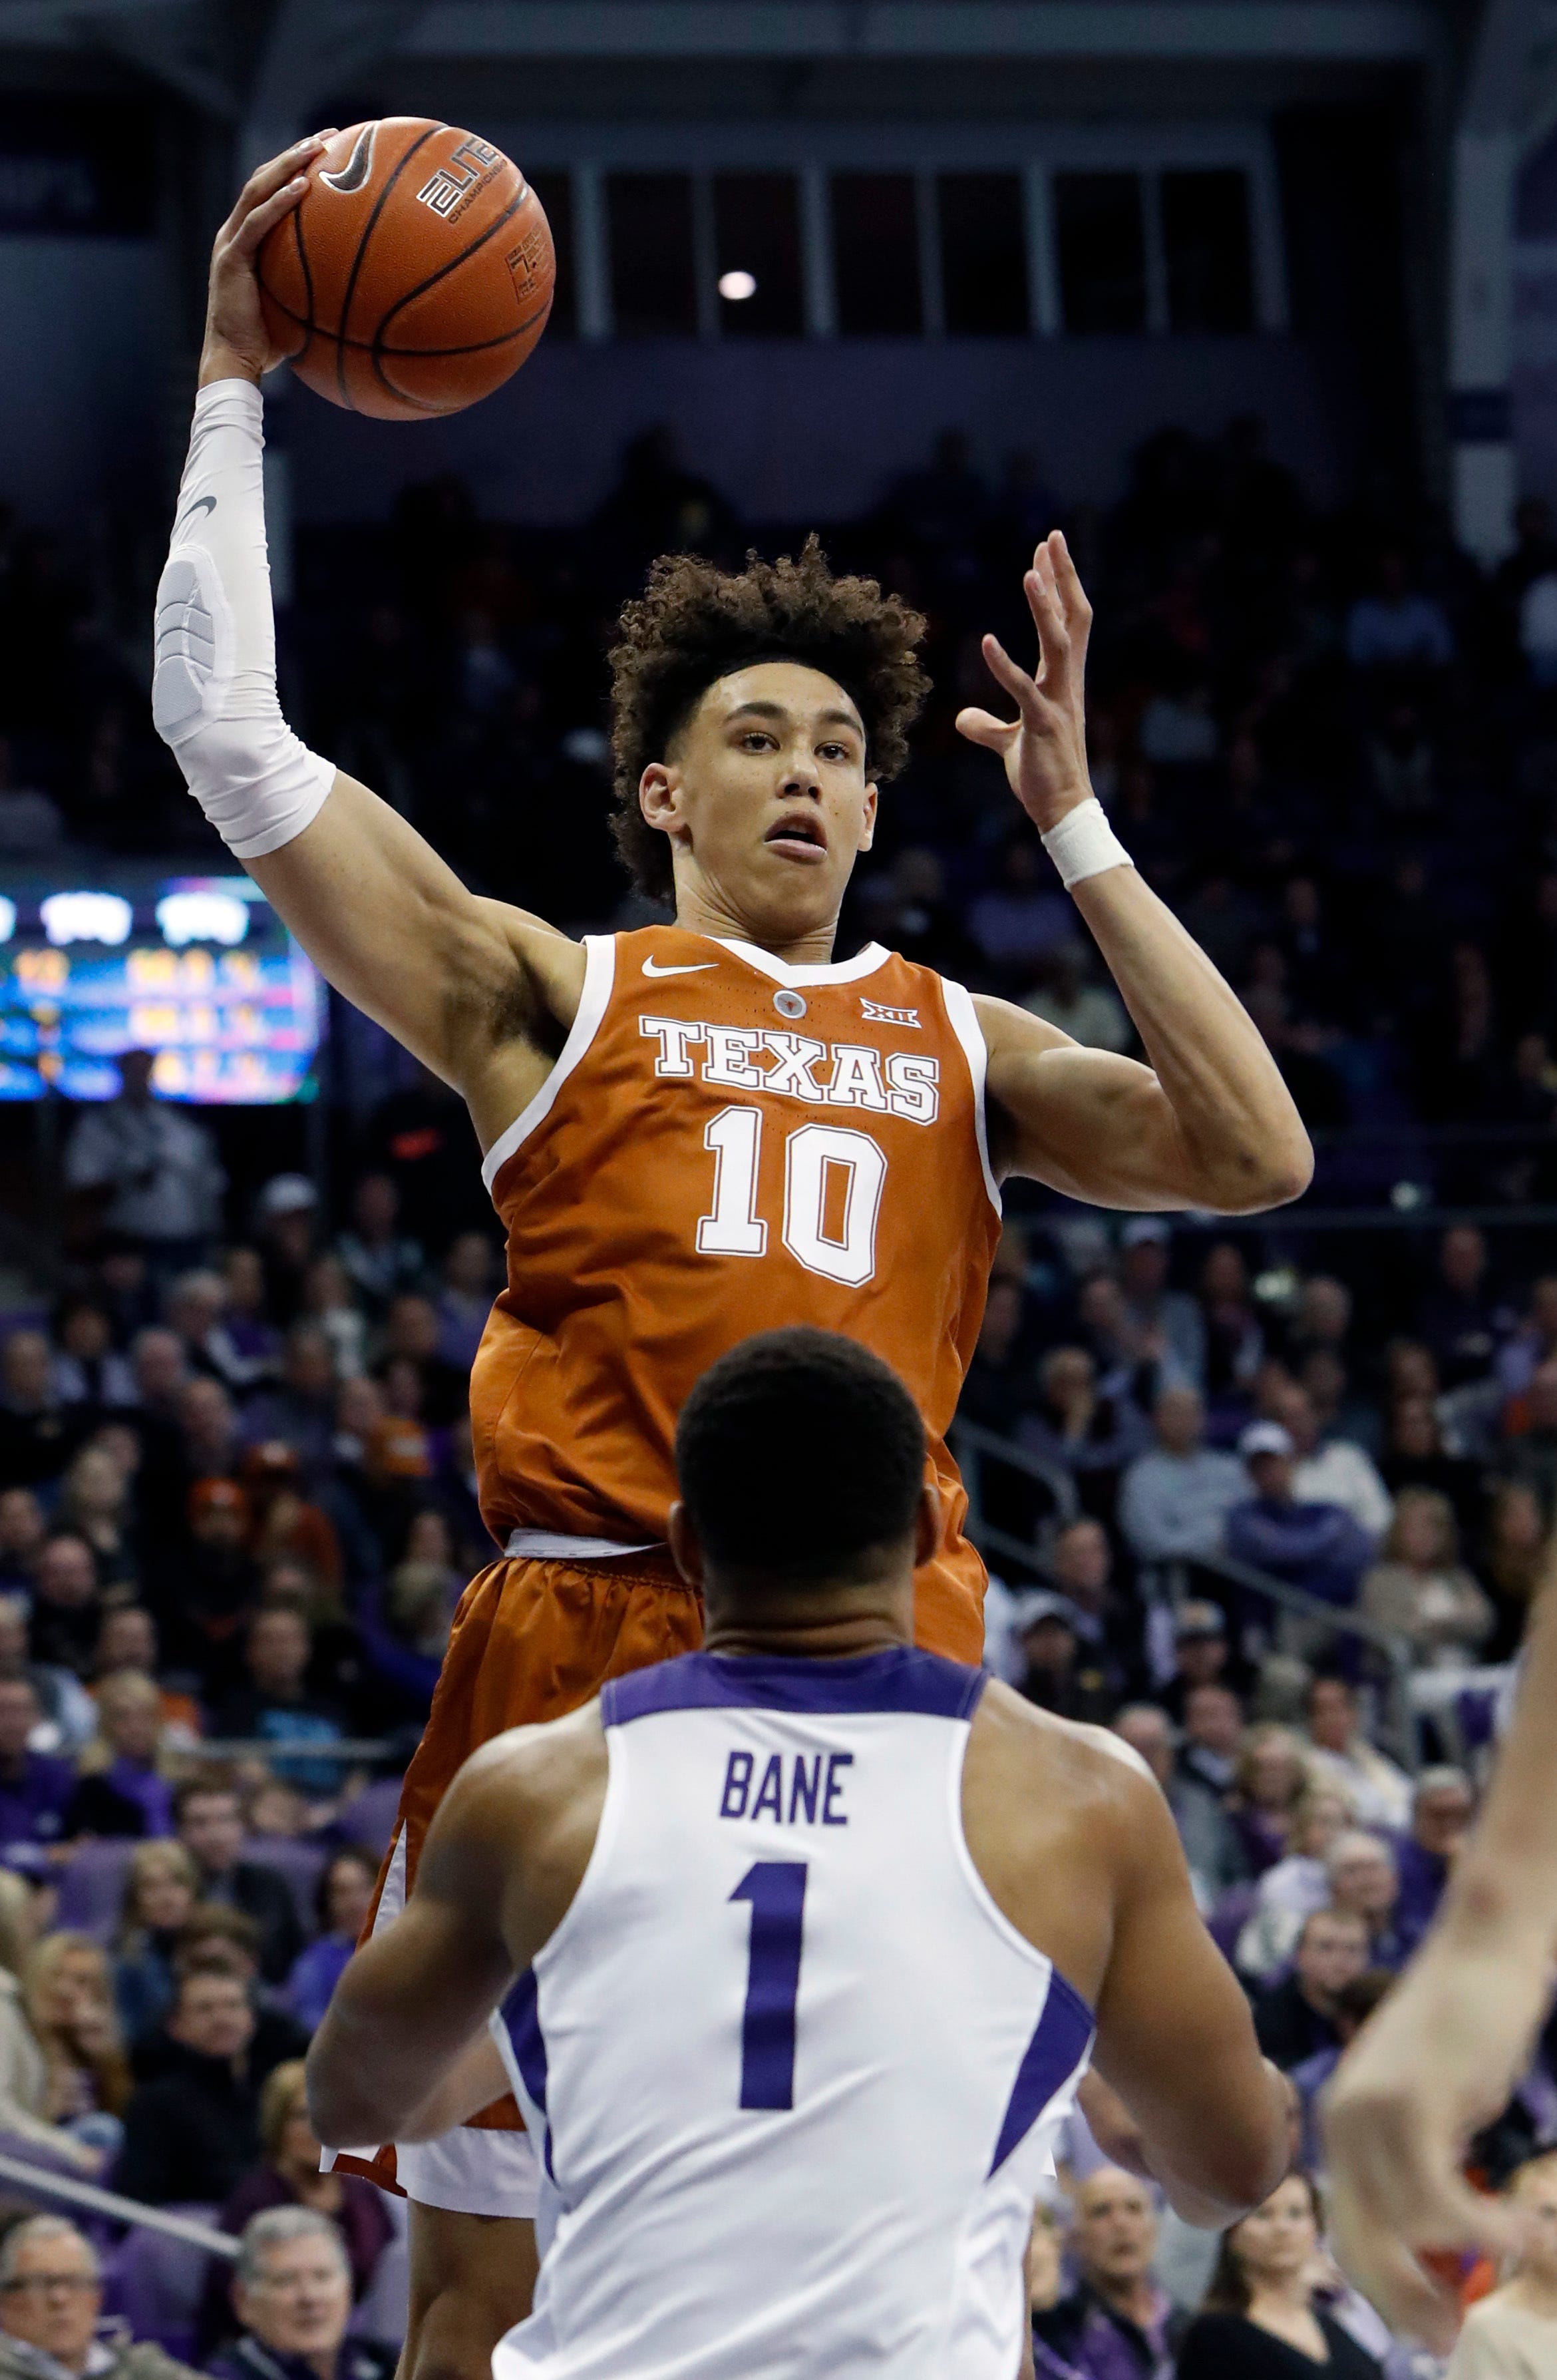 10. Atlanta Hawks: Jaxson Hayes, C, Texas. The Hawks’ second pick in the first round nets them a high-flying and athletic big man in Hayes, who averaged 10 points and 5 rebounds with Texas. He’s the top center on the board and fits well with Cam Reddish in the Hawks’ rebuilding plans.